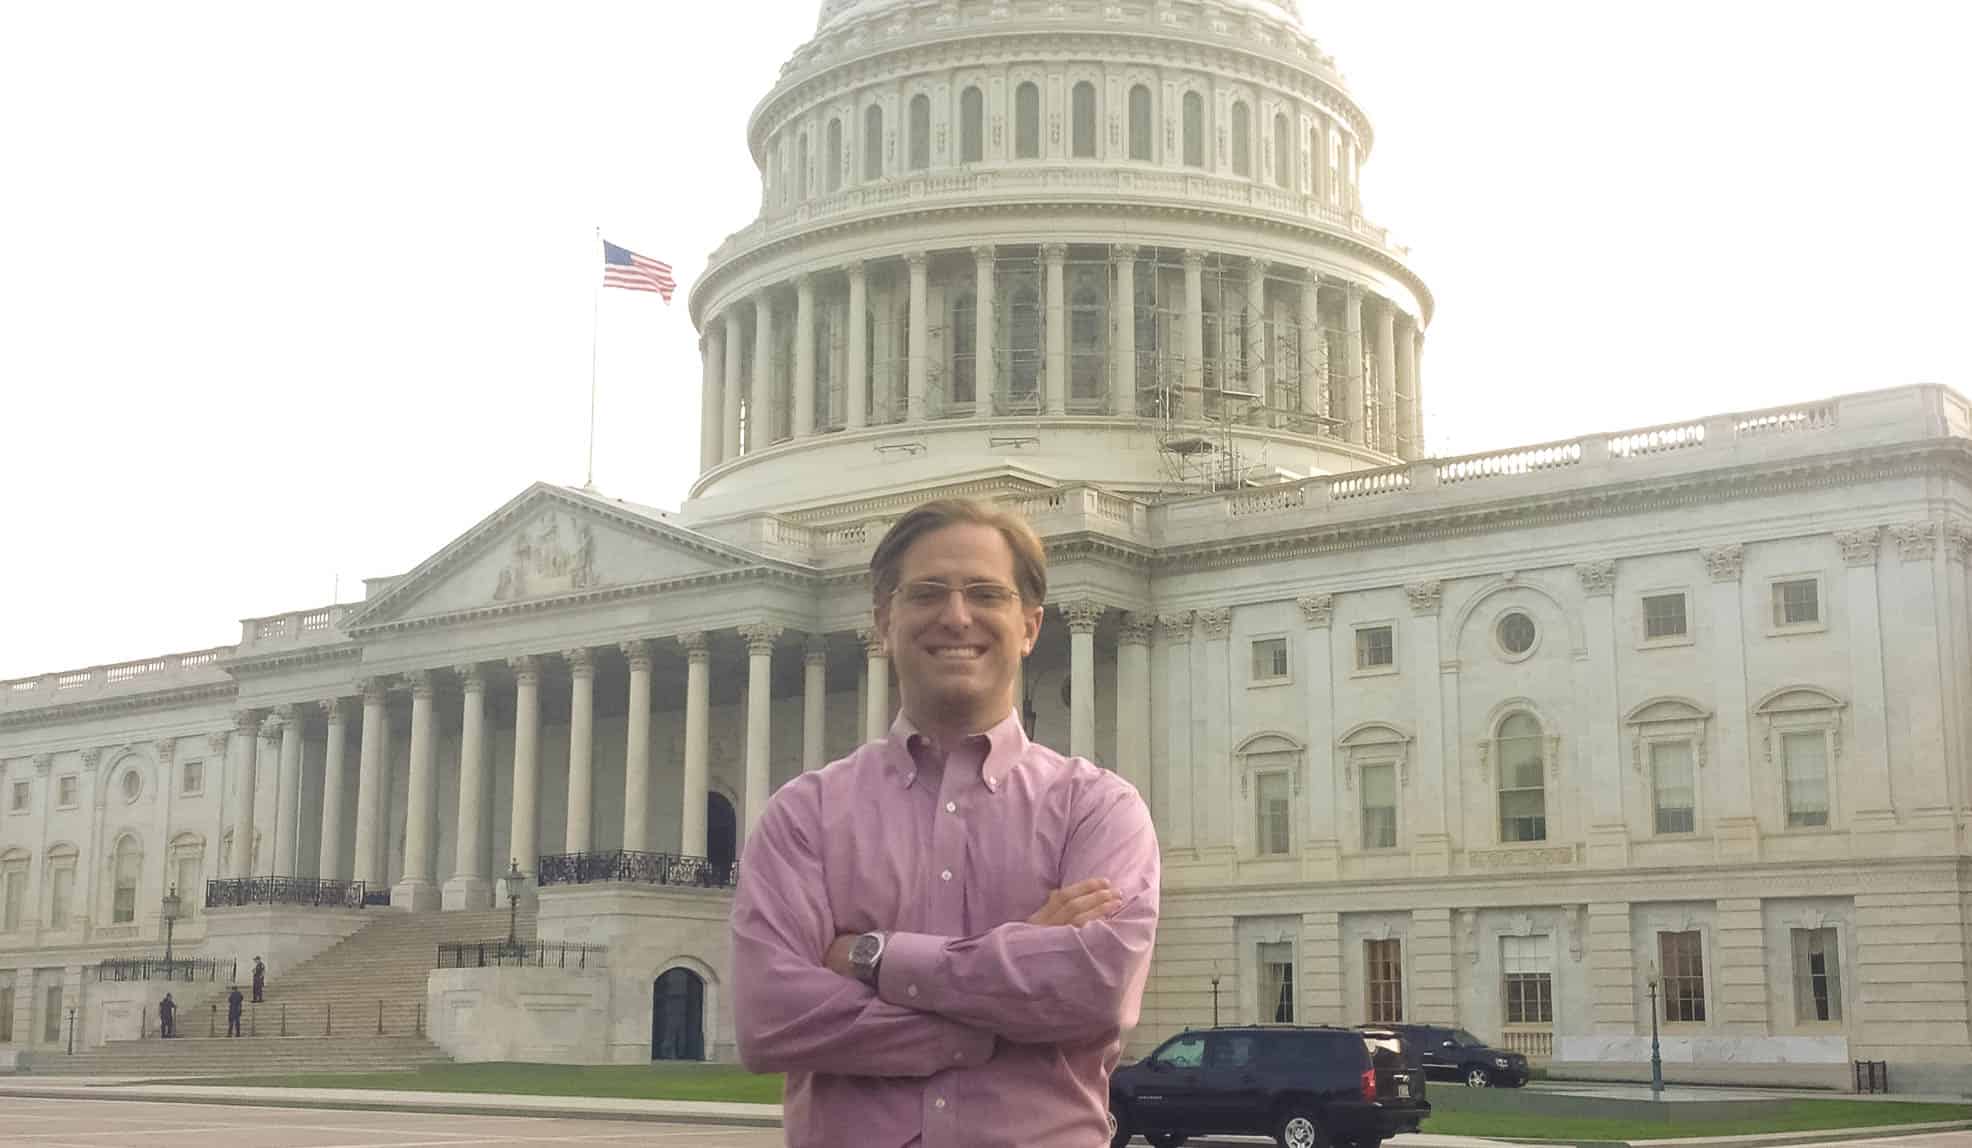 Chris Coakley stands with his arms crossed smiling in front of Washington D.C.'s capitol building.